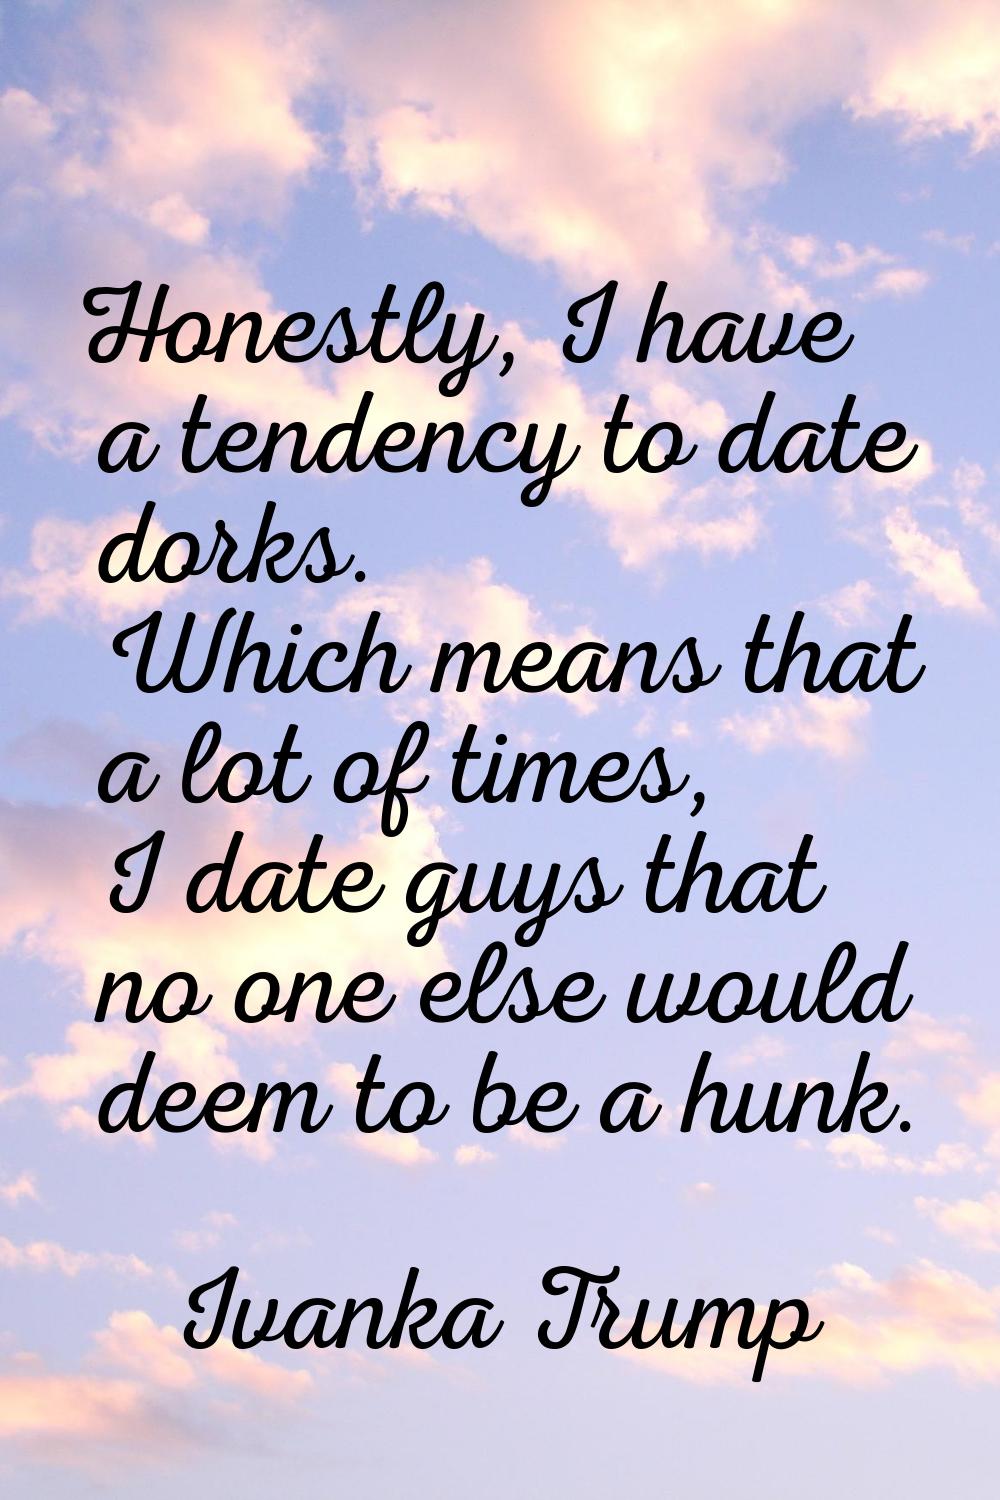 Honestly, I have a tendency to date dorks. Which means that a lot of times, I date guys that no one